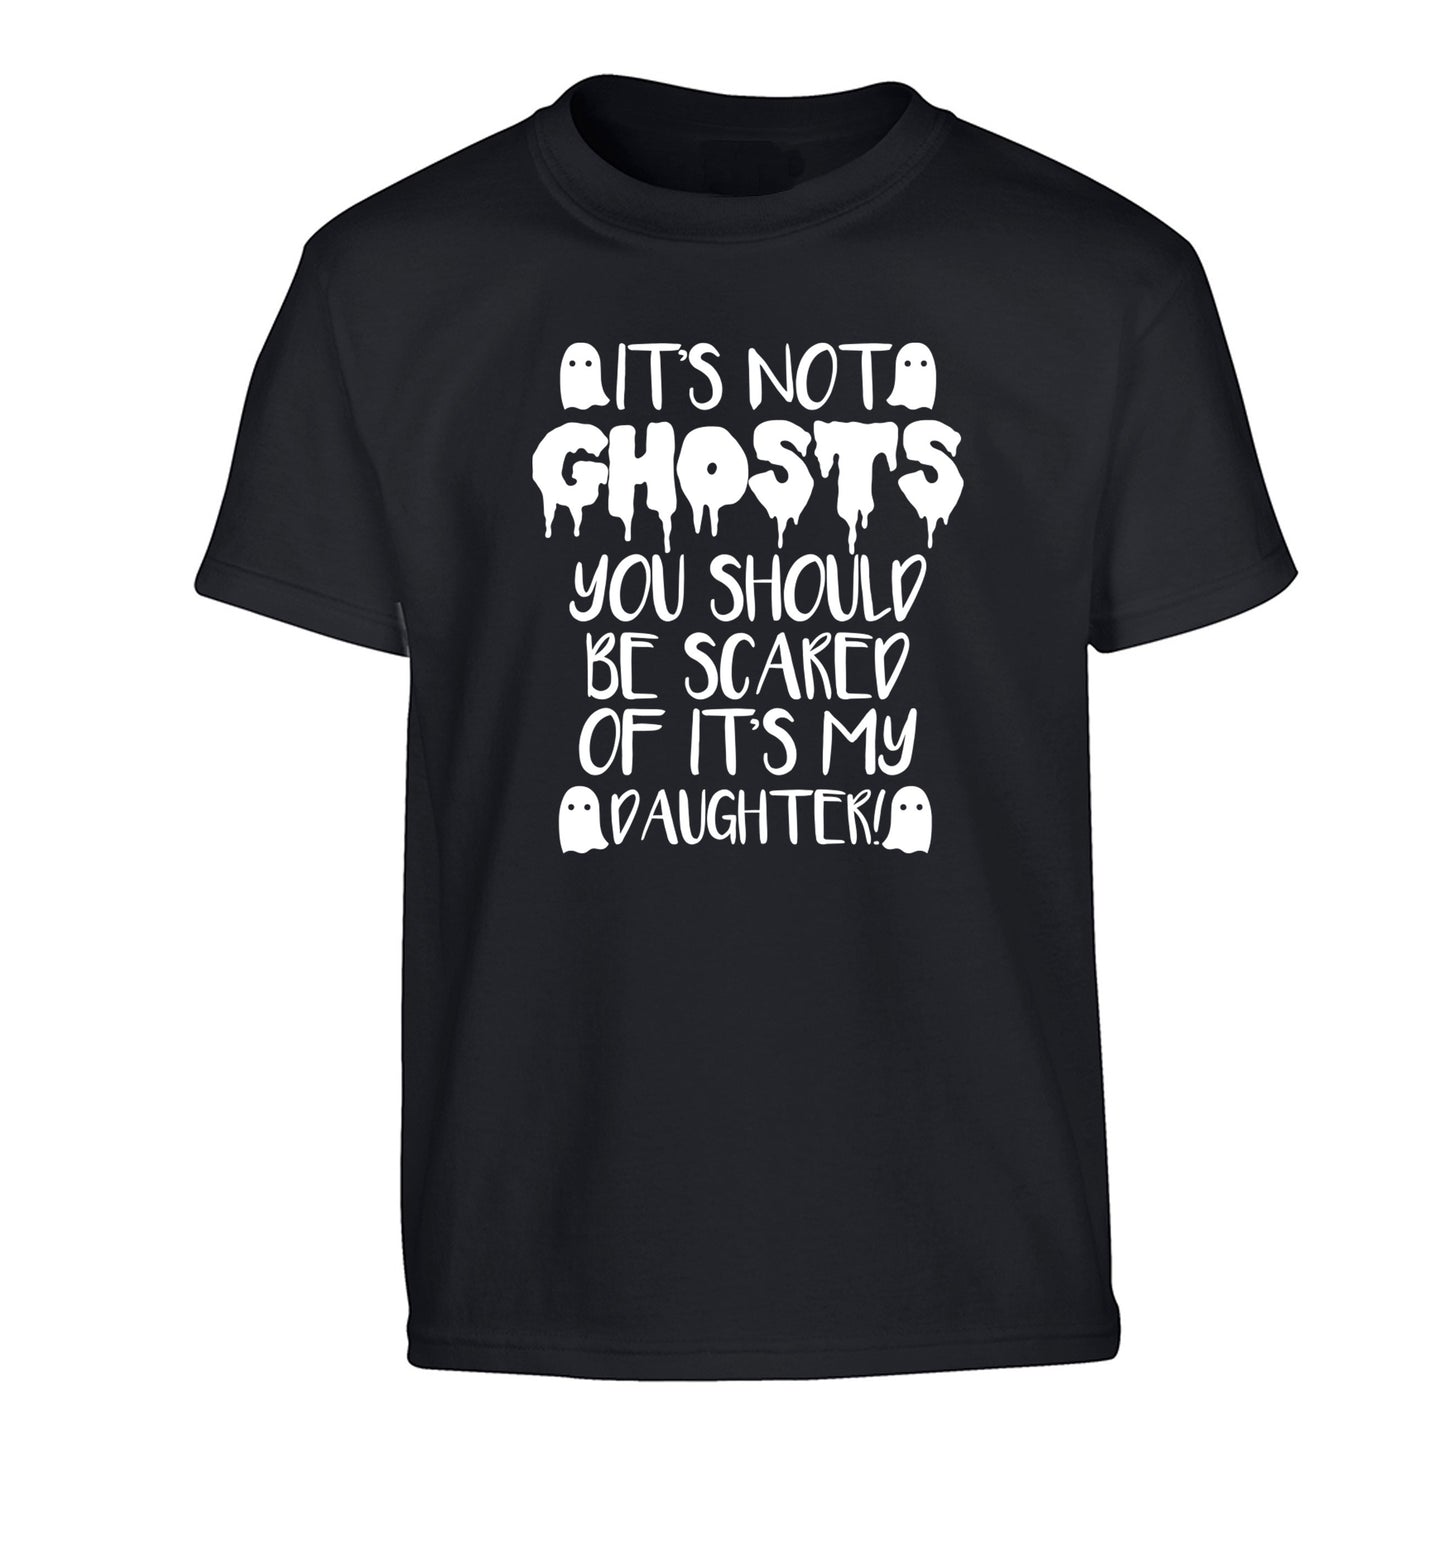 It's not ghosts you should be scared of it's my daughter! Children's black Tshirt 12-14 Years